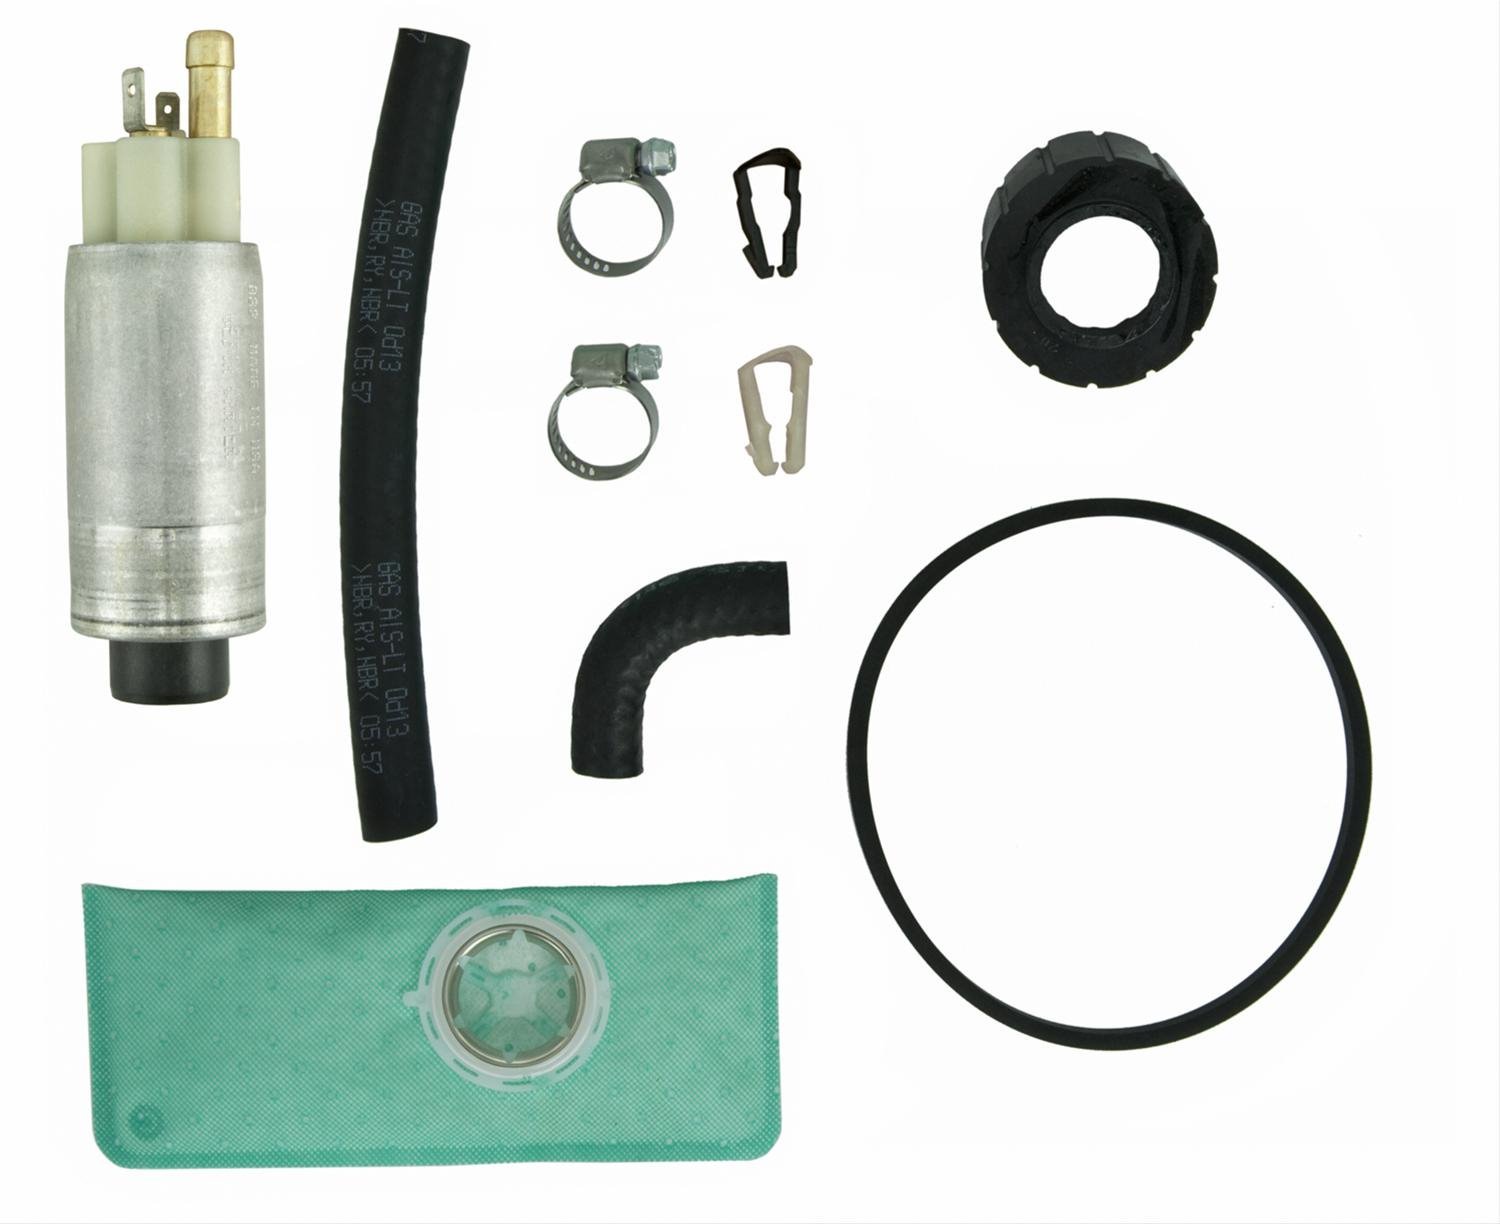 EFI In-Tank Electric Fuel Pump And Strainer Set for 1986-1997 Ford/Mazda/Mercury